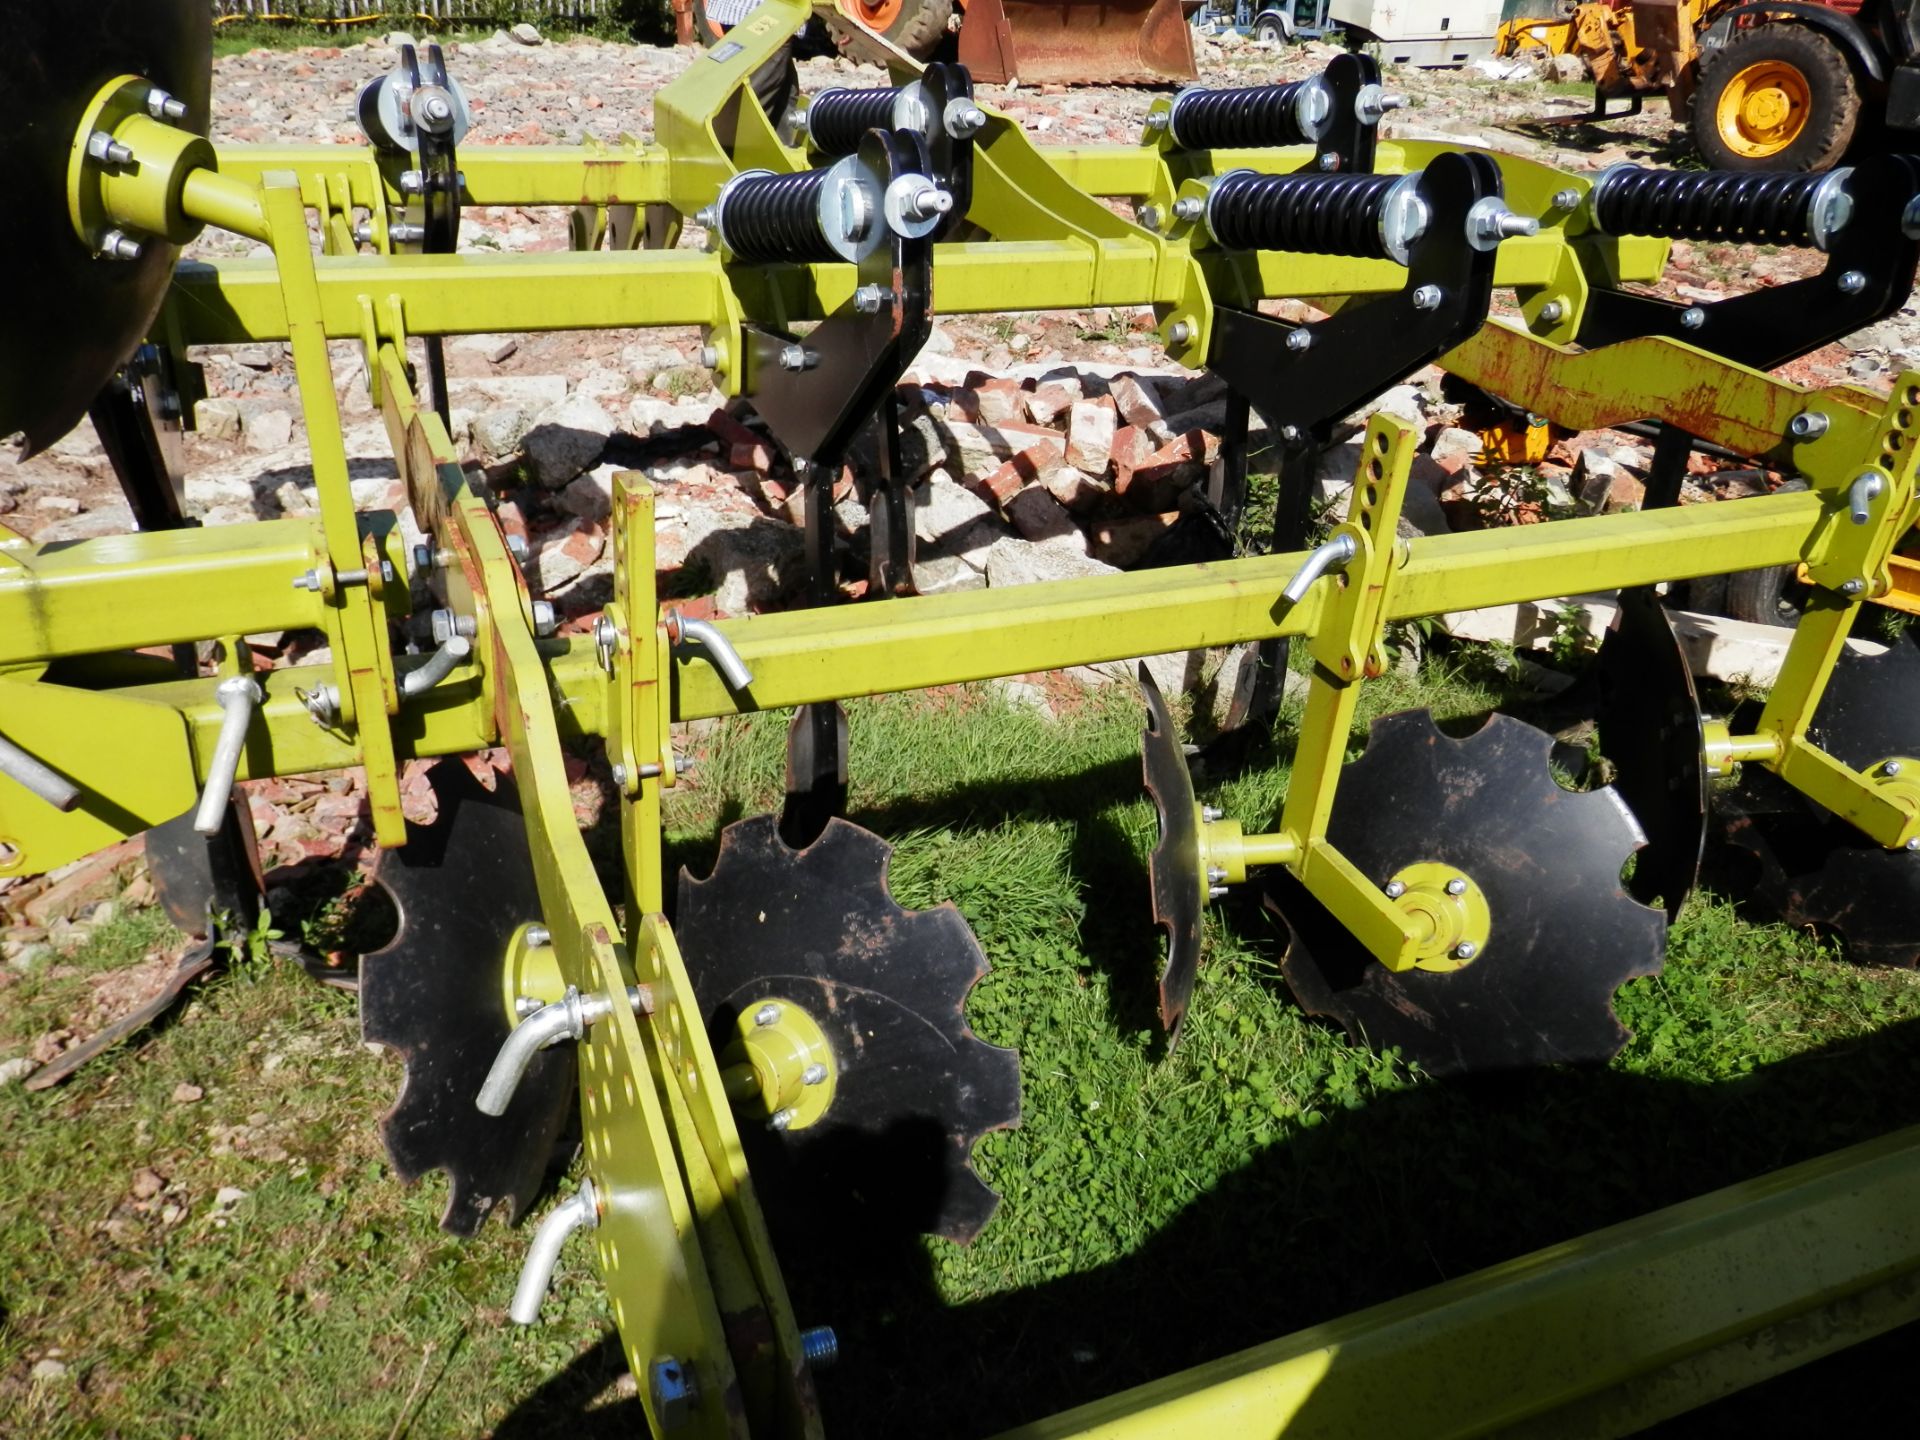 2014 UNUSED/NEW TERESA ASG-30 MINIMUM CULTIVATION TRACTOR ATTACHMENT (LEMKIN PARTS) POLISH MADE. - Image 7 of 8